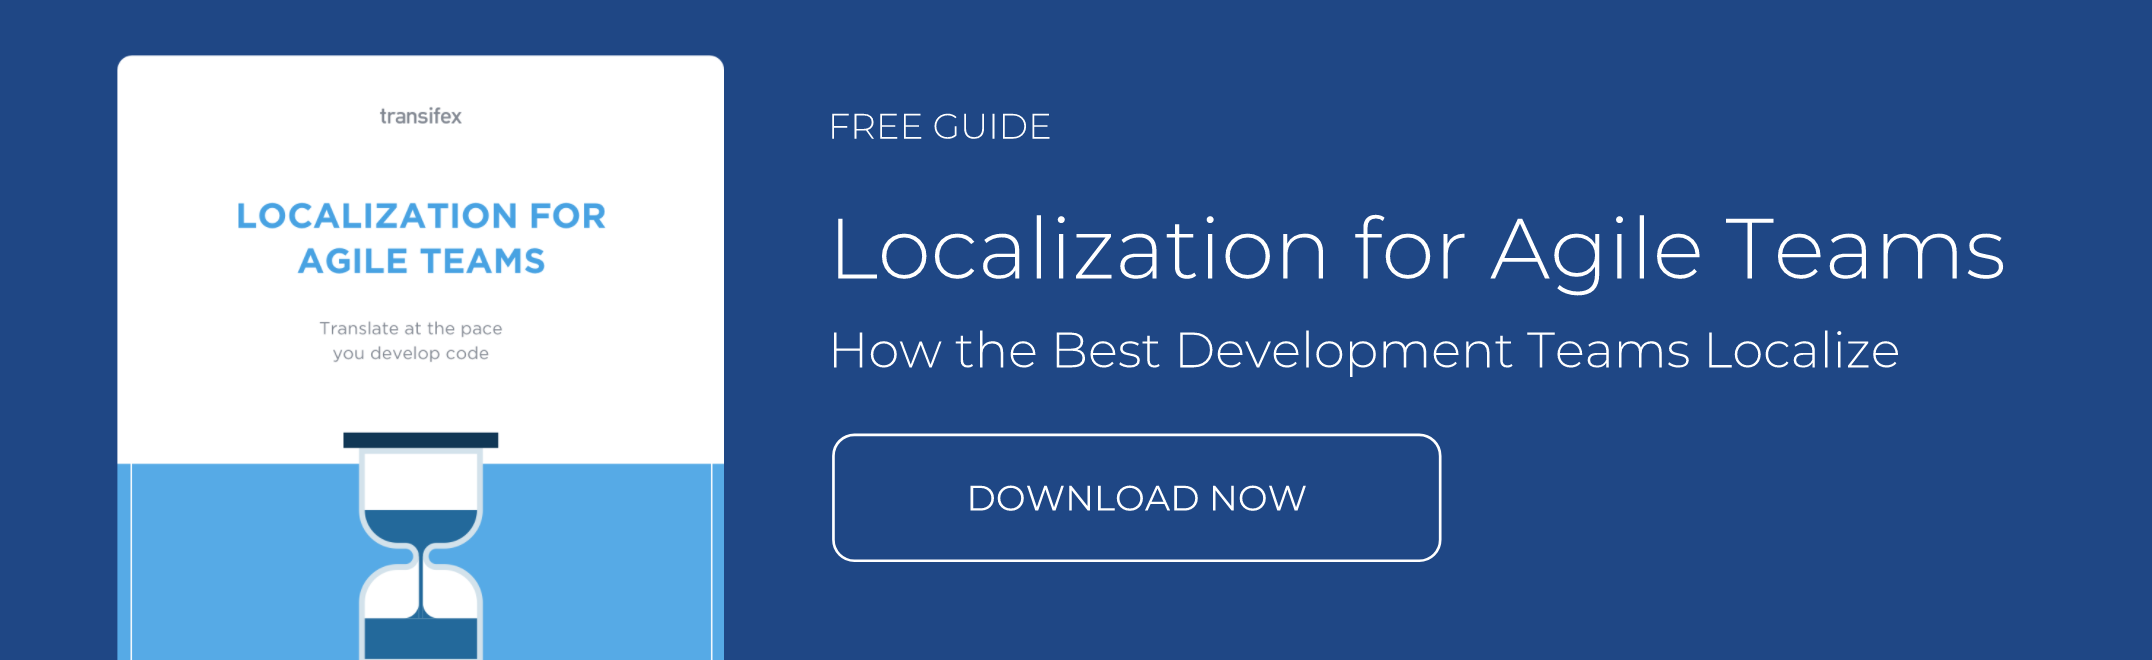 localization-for-agile-teams-guide-download